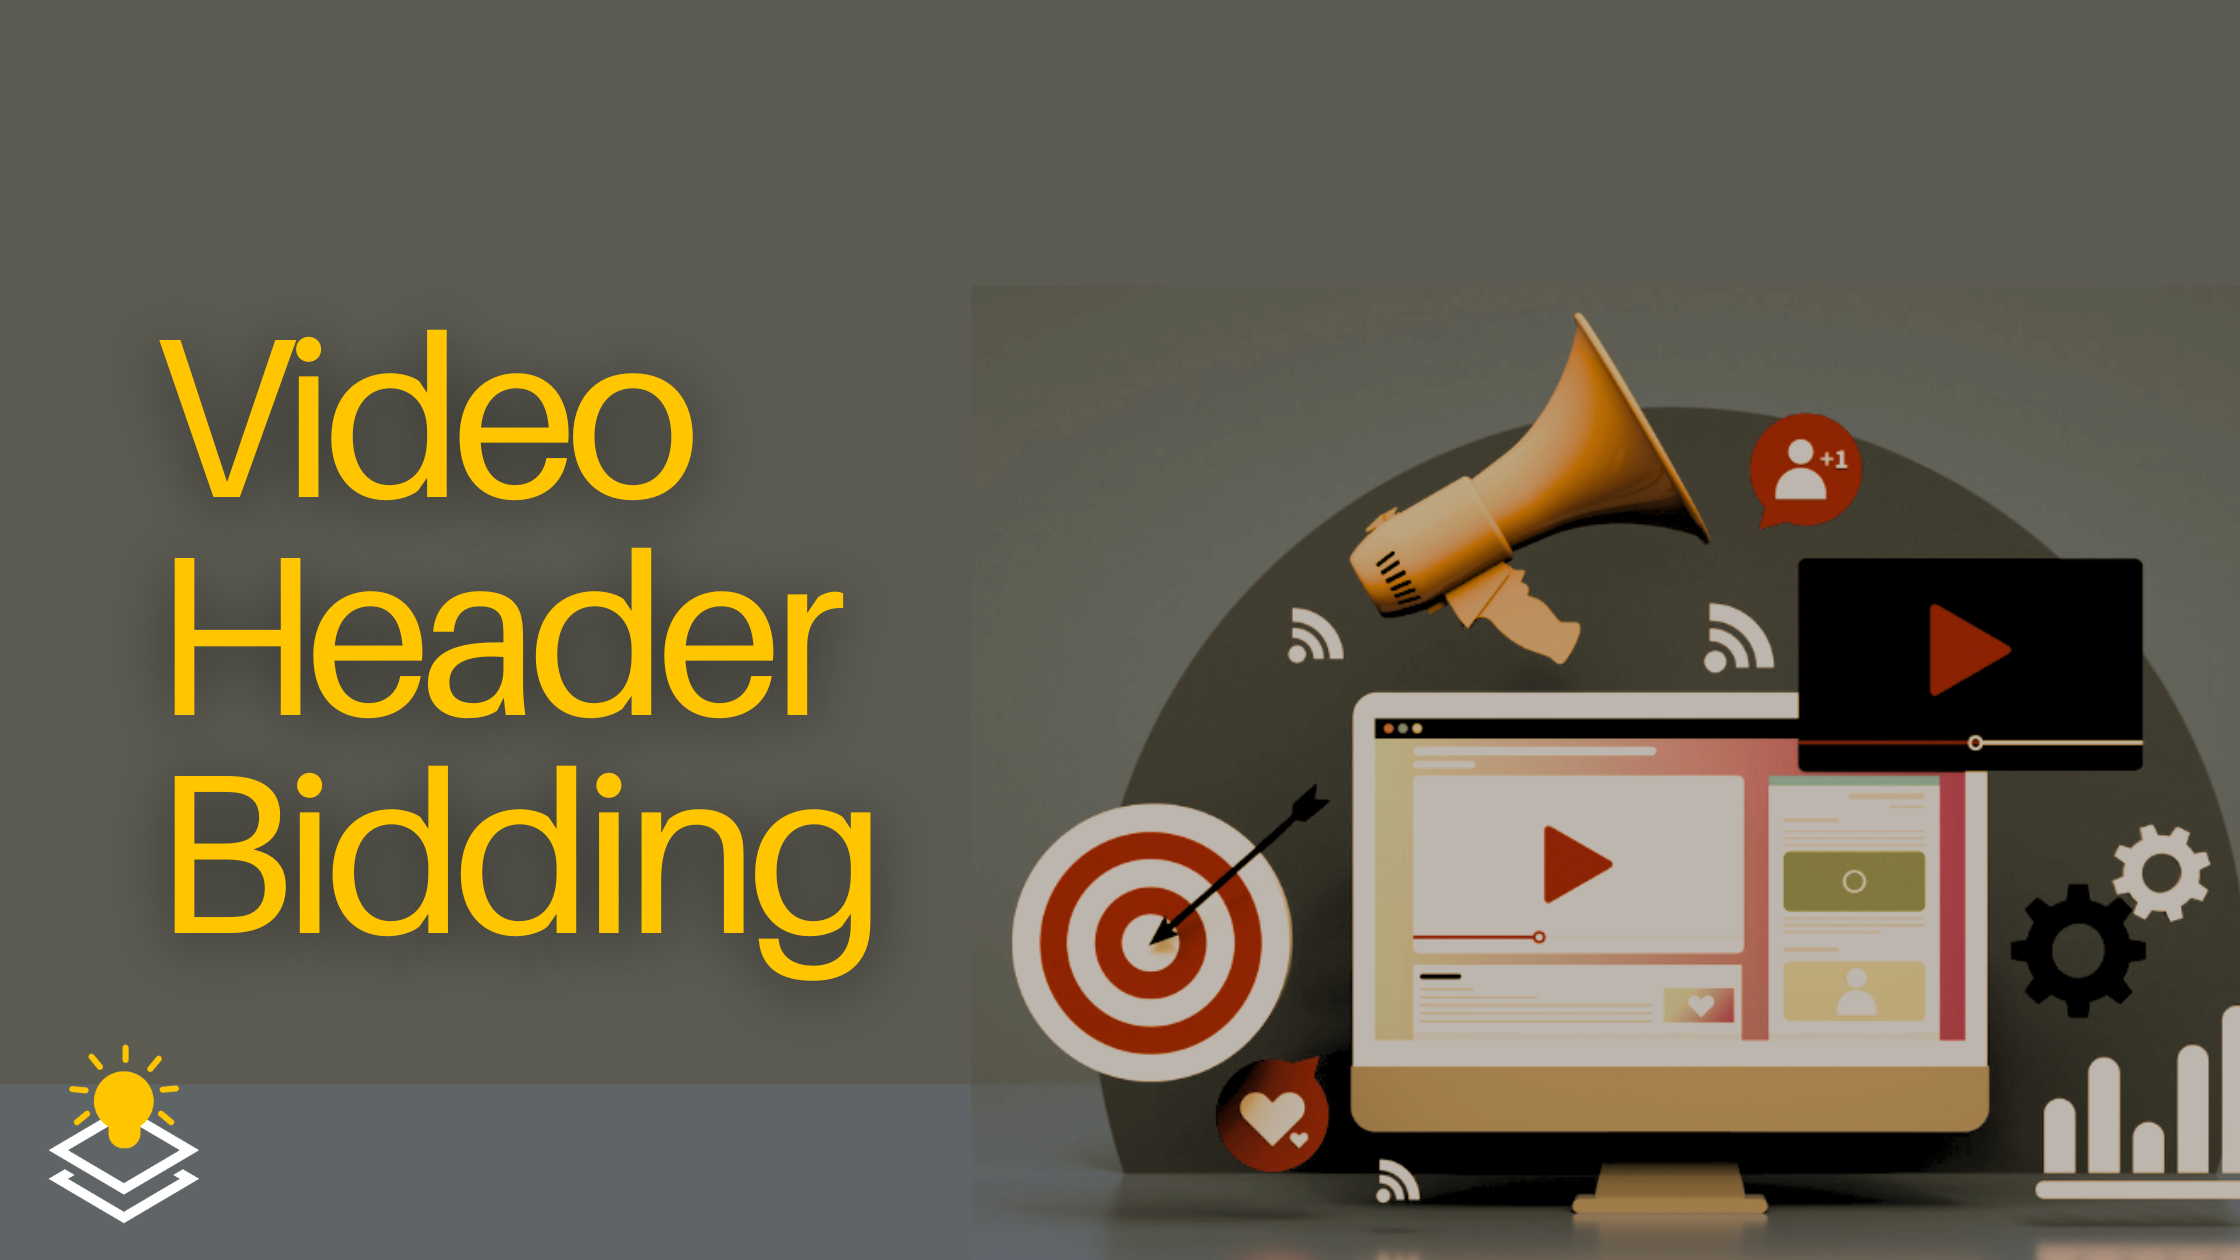 A Detailed Guide on Video Header Bidding